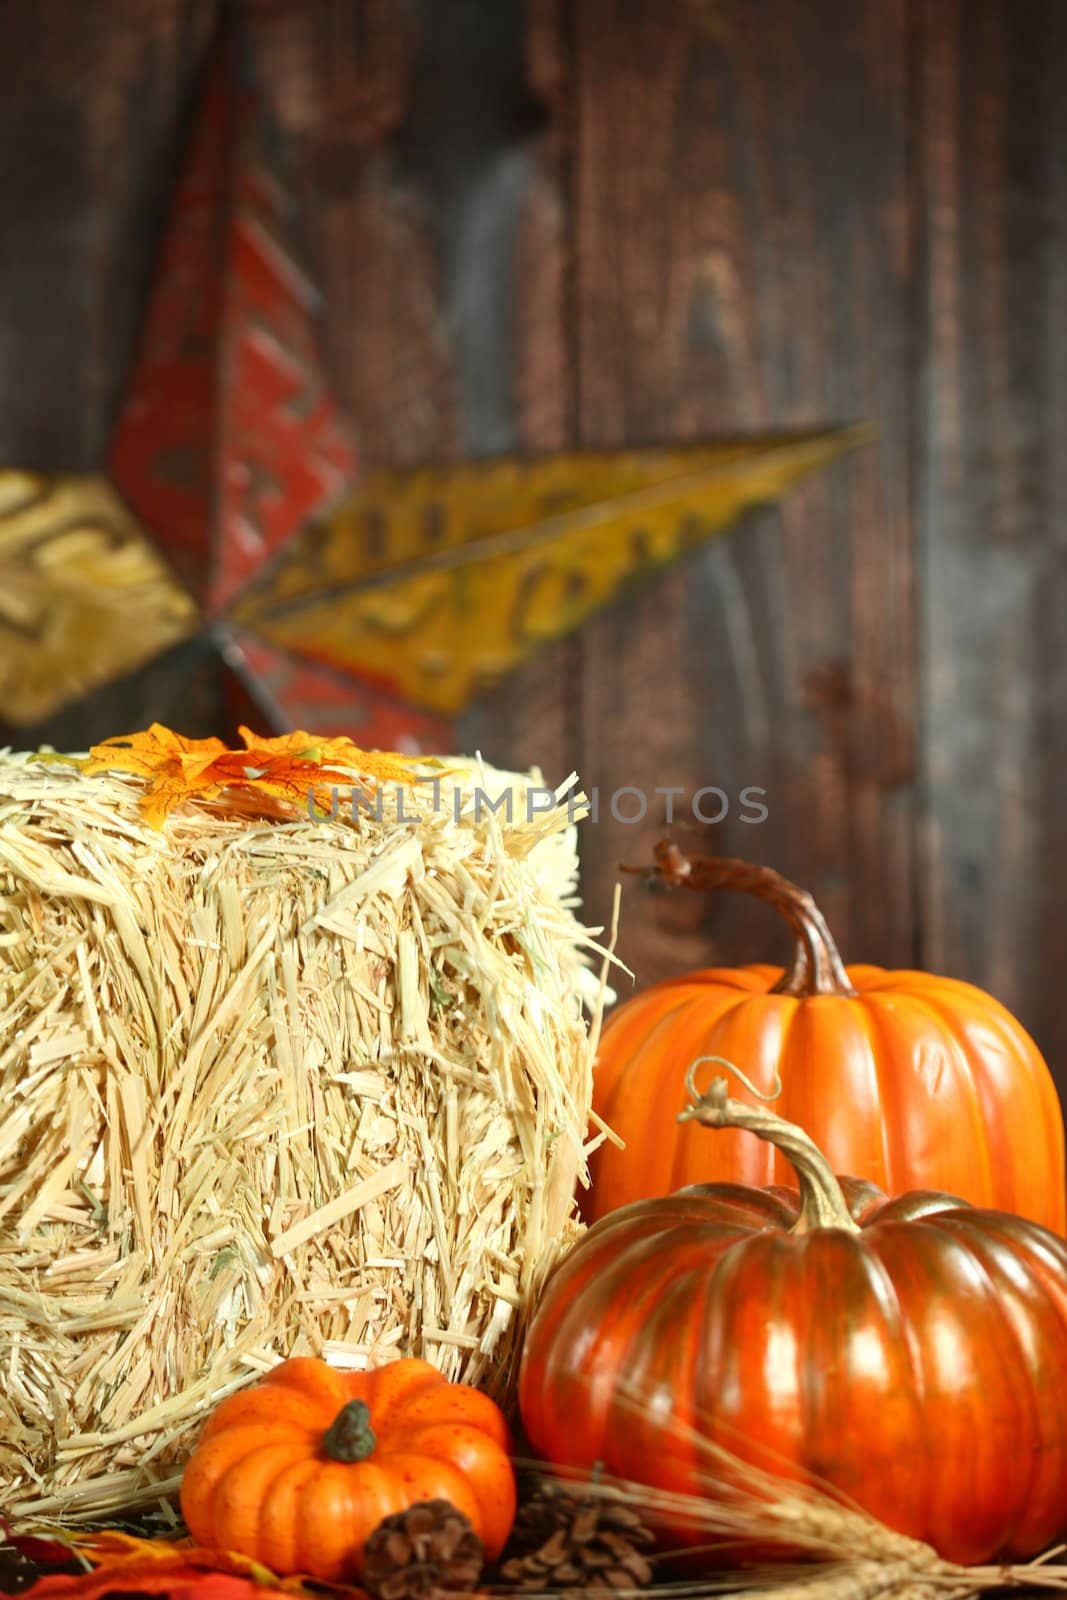 Rustic Fall Themed Scene With Pumpkins on Wood Grunge Background